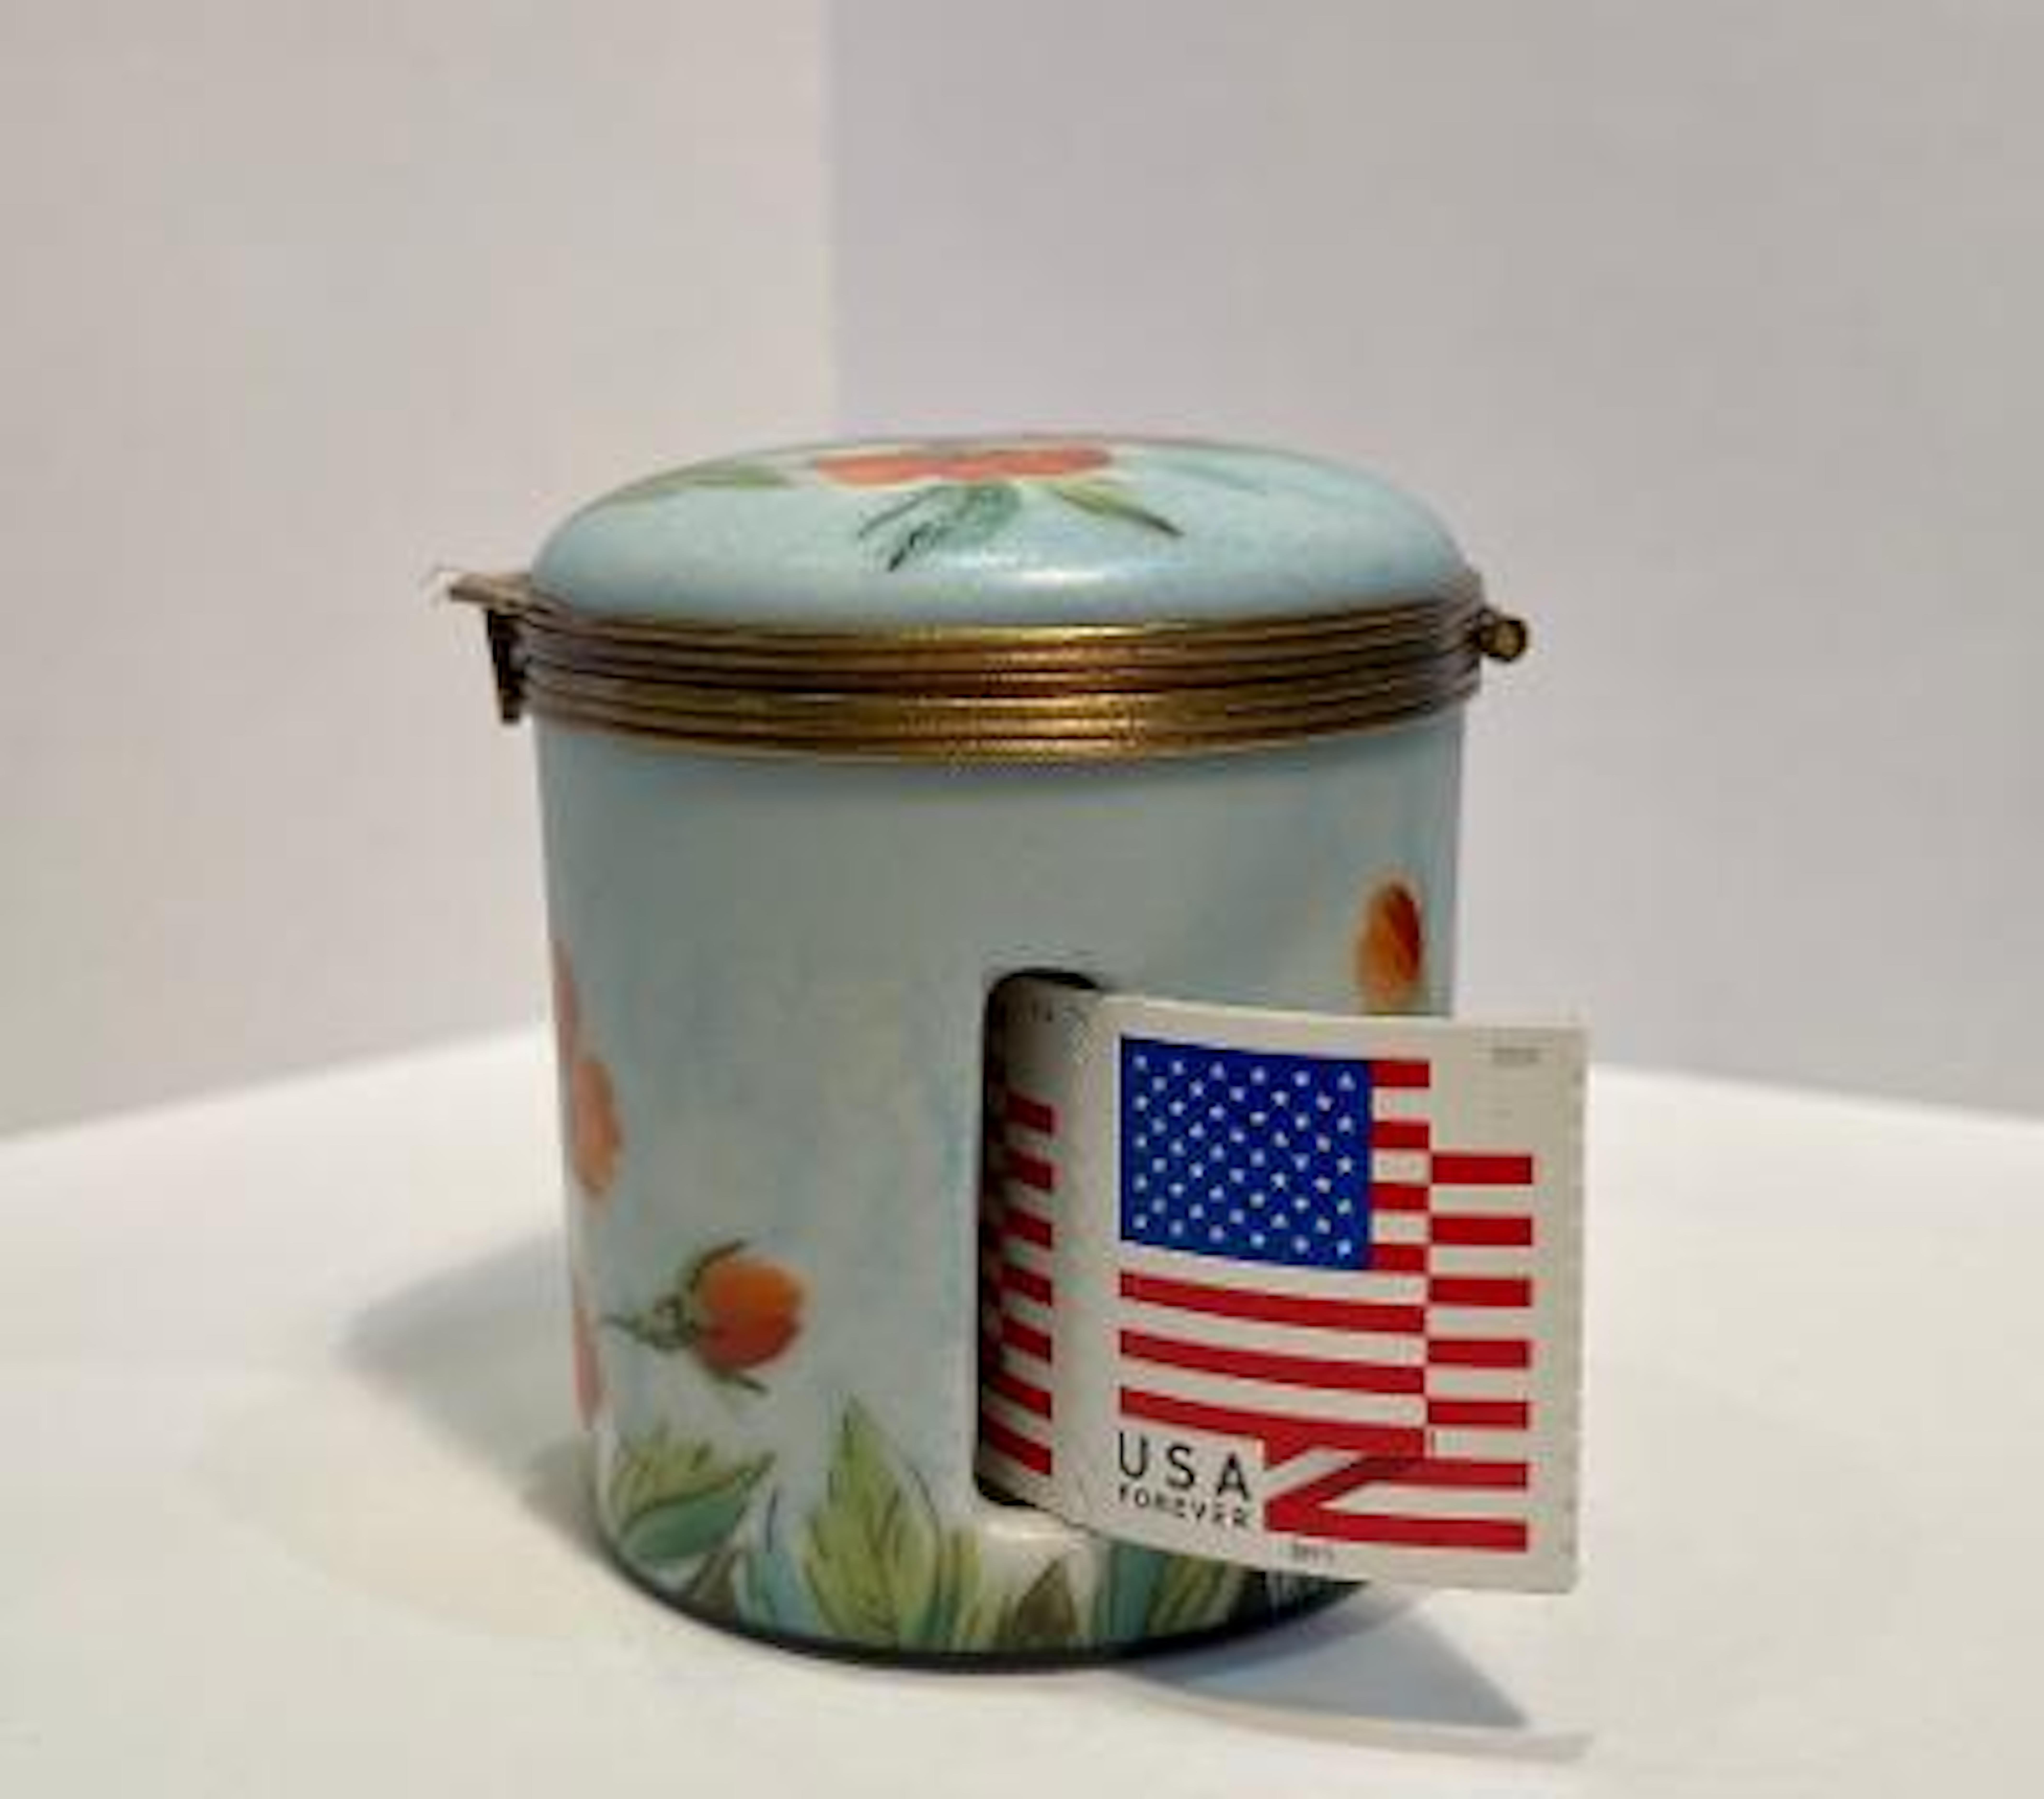 Fine quality and practical, Limoges porcelain cylinder shaped postage stamp distributer box is handmade and features a pretty pale sky blue background with skillfully hand painted budding and blooming orange poppies surrounding the entire circular